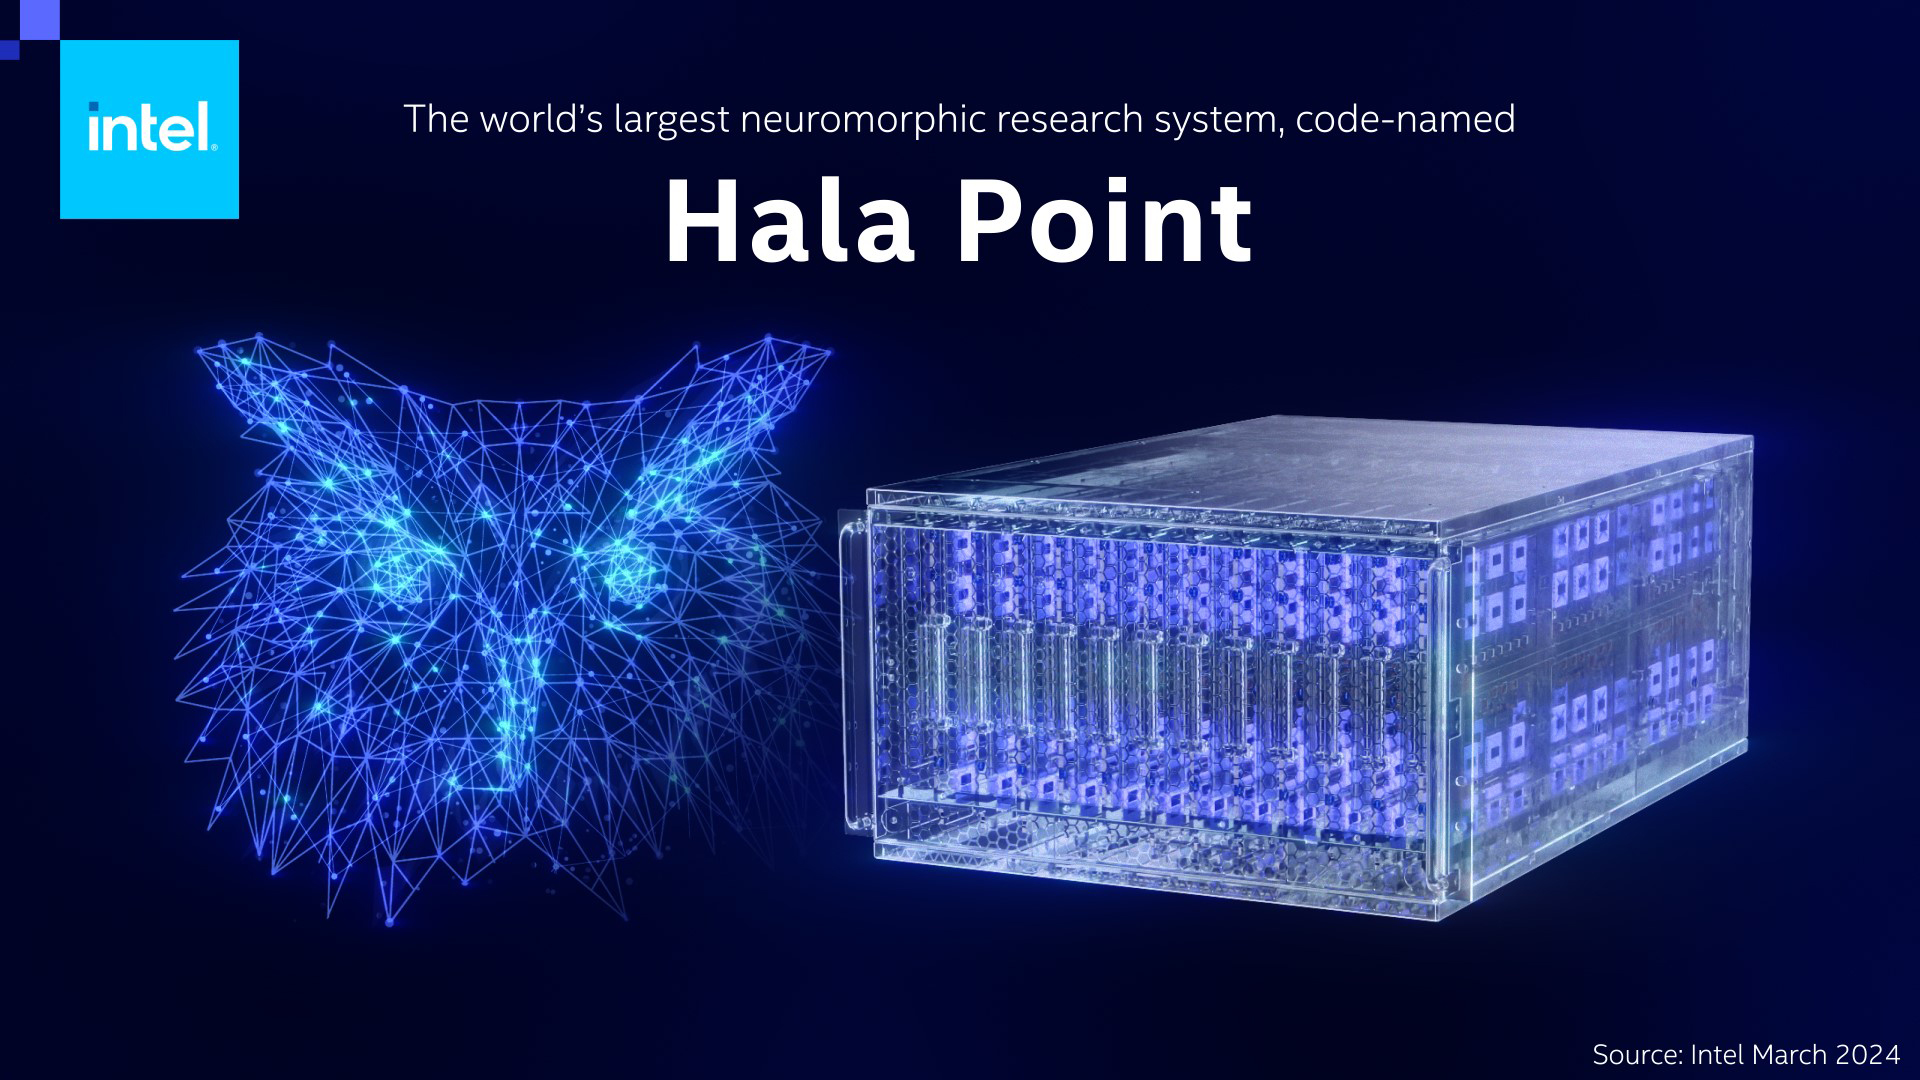 What’s New: Today, Intel announced that it has built the world's largest neuromorphic system. Code-named Hala Point, this large-scale n